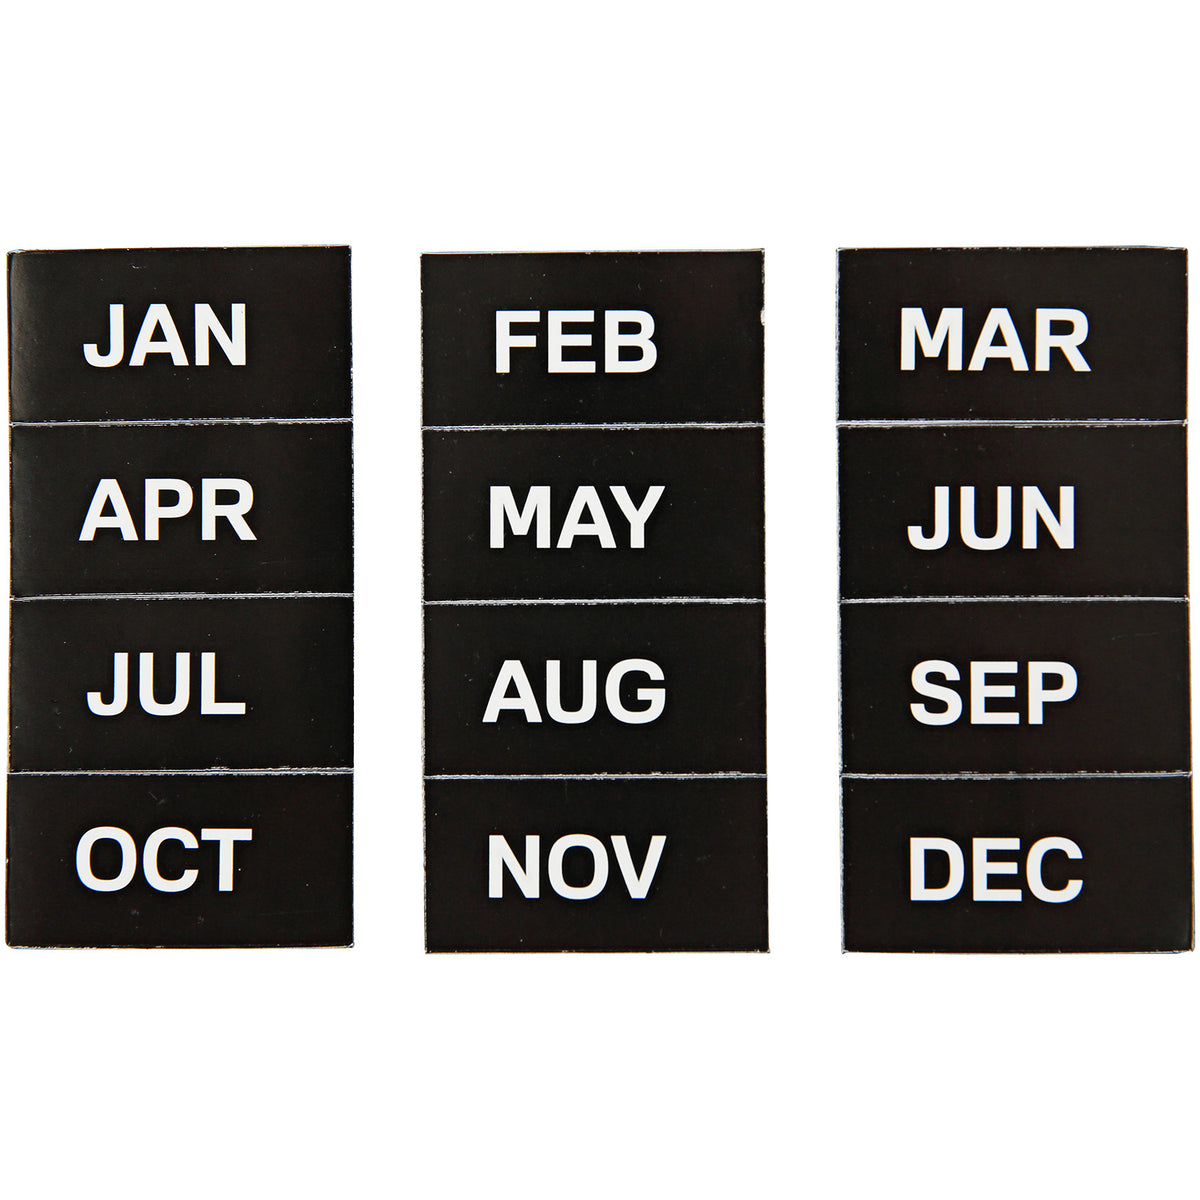 FM1108 Set of "Months of the Year" White Board Calendar Magnets, 12 Magnets, Jan-Dec, 1" x 2" by MasterVision